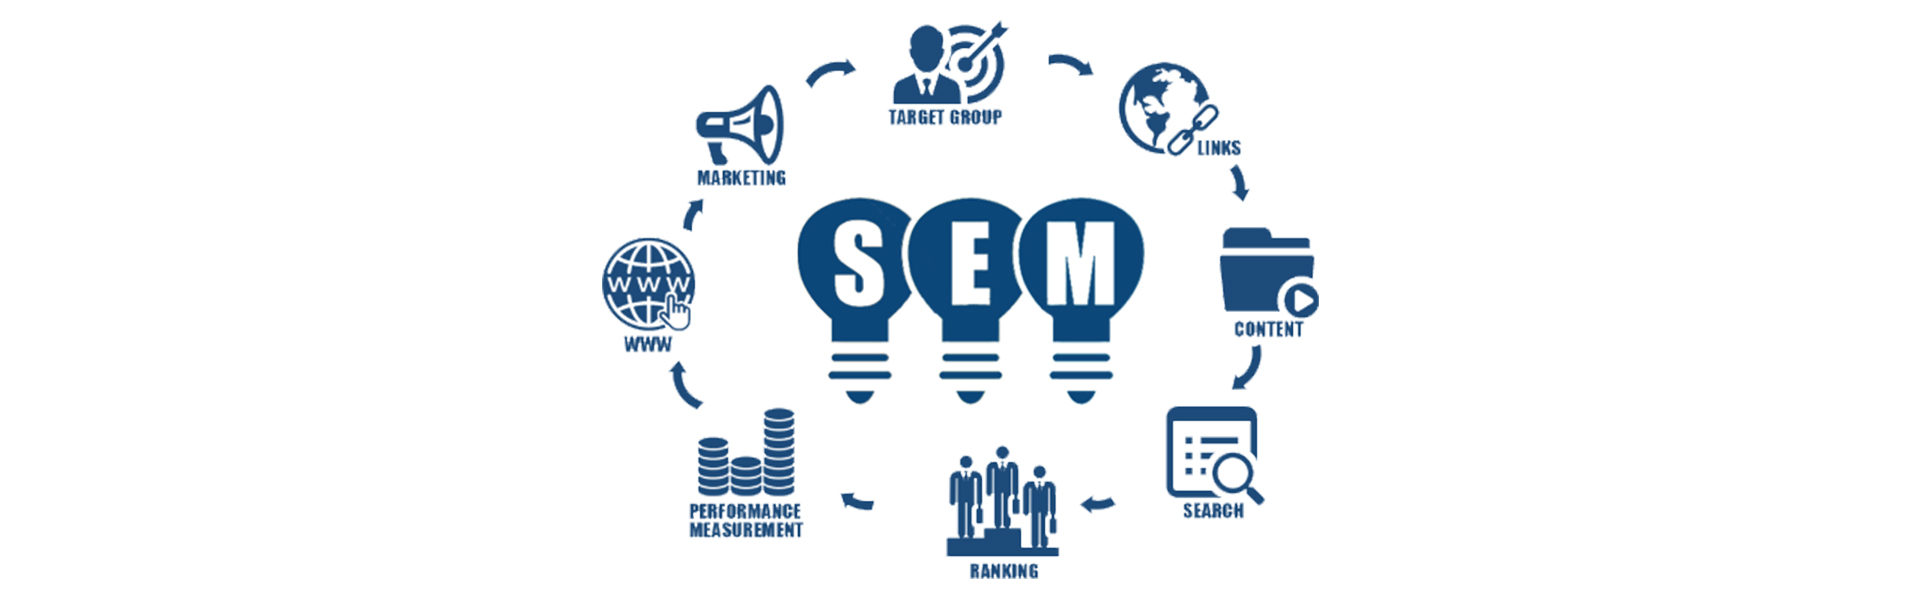 Benefits of SEM for Your Business Marketing 